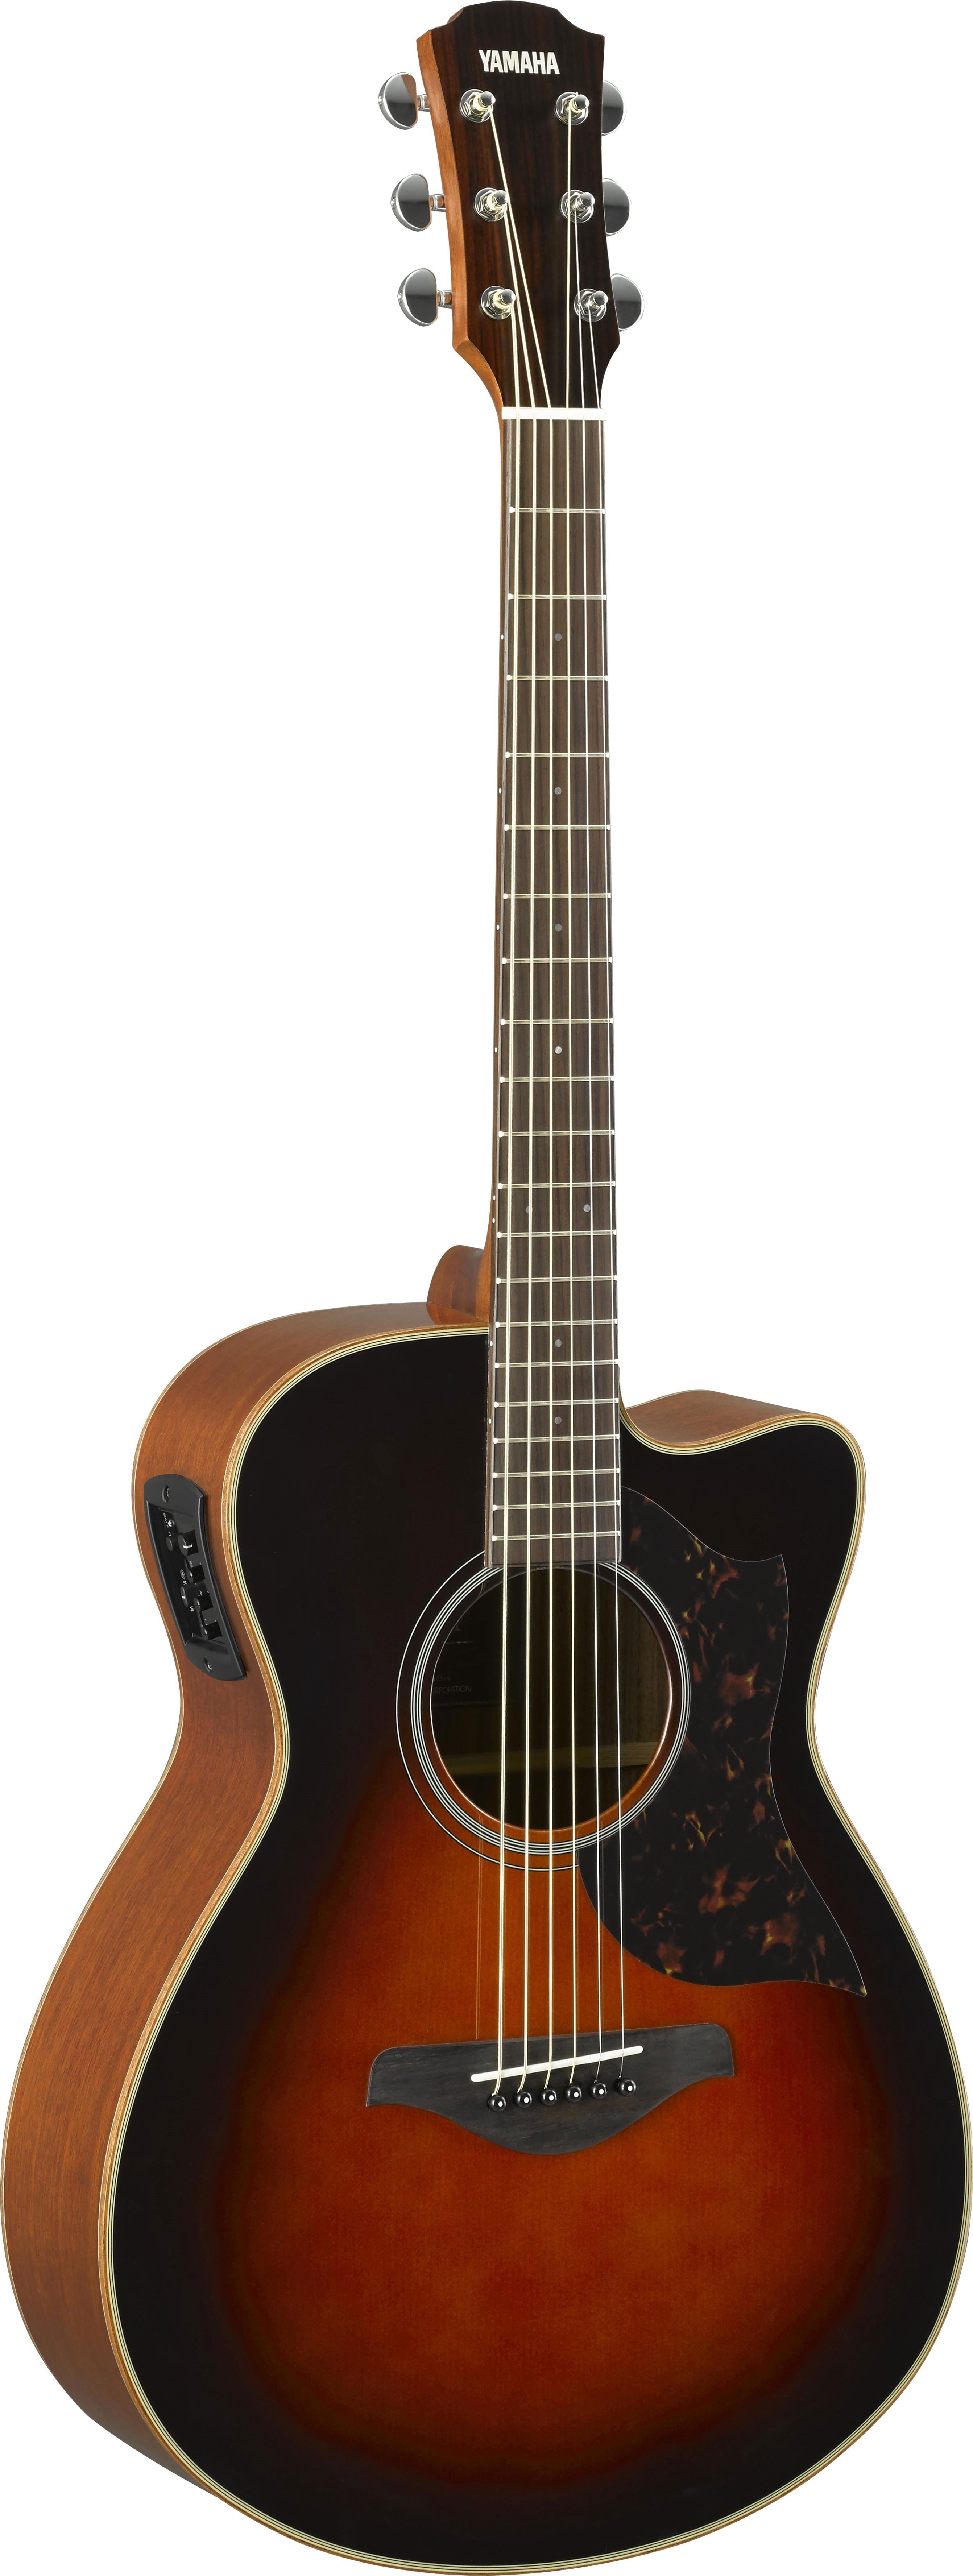 Yamaha AC1M Concert Cutaway - Sunburst Acoustic-Electric Guitar, Sitka Spruce Top, Mahogany Back and Sides for sale